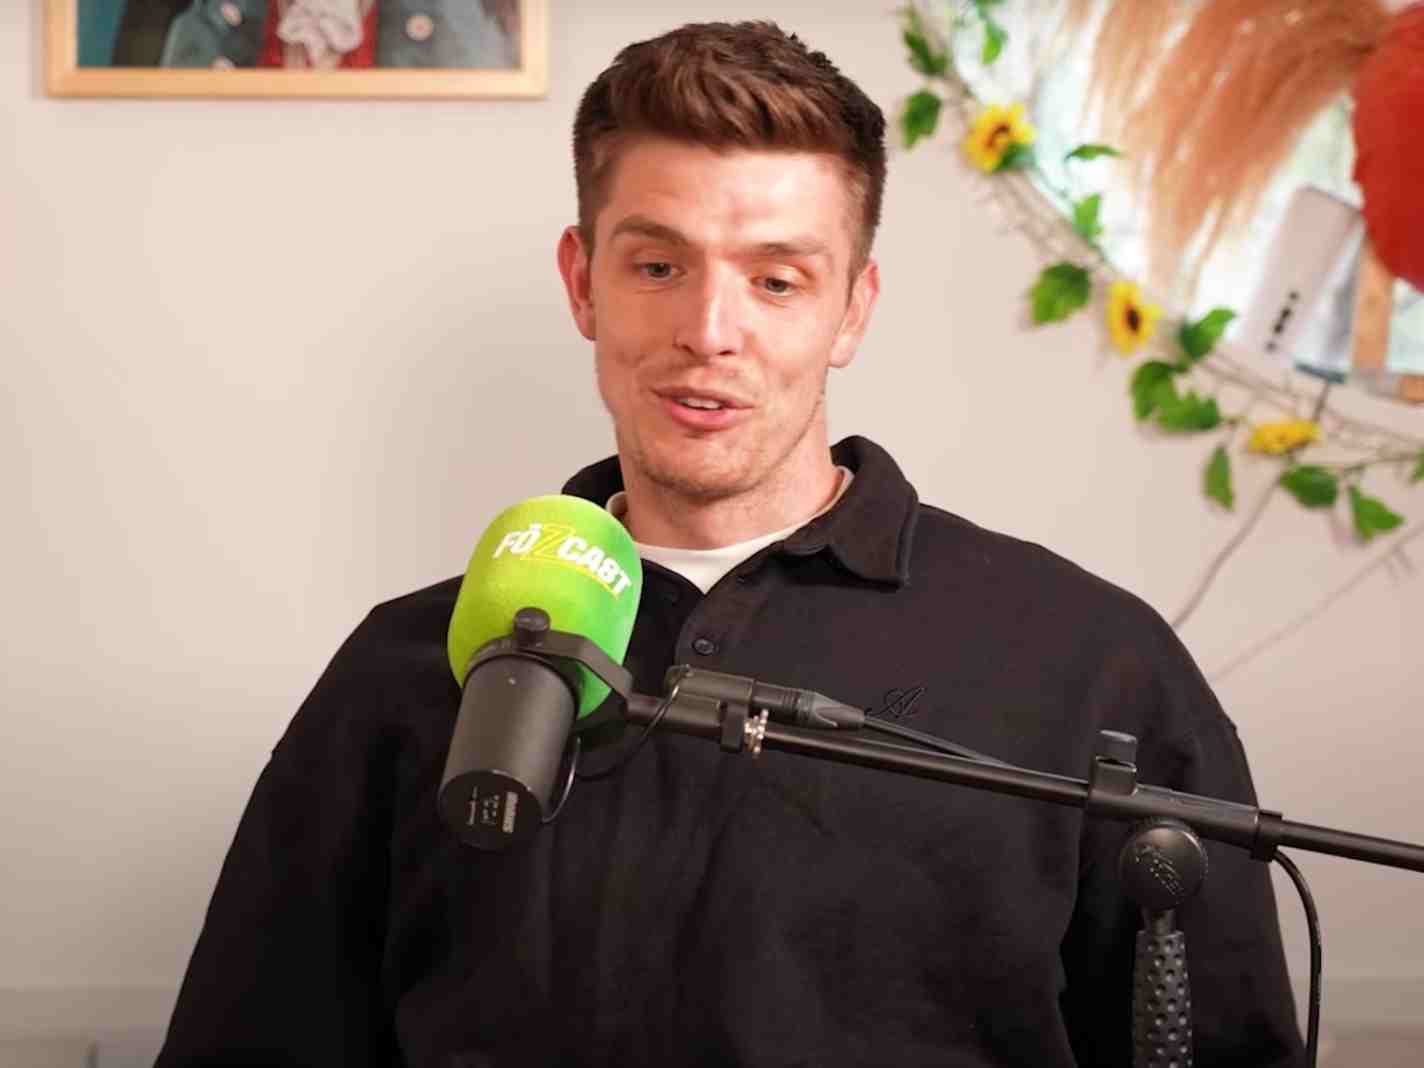 NUFC Keeper Nick Pope Roasts IQ of His Own Teammates in Fozcast Interview